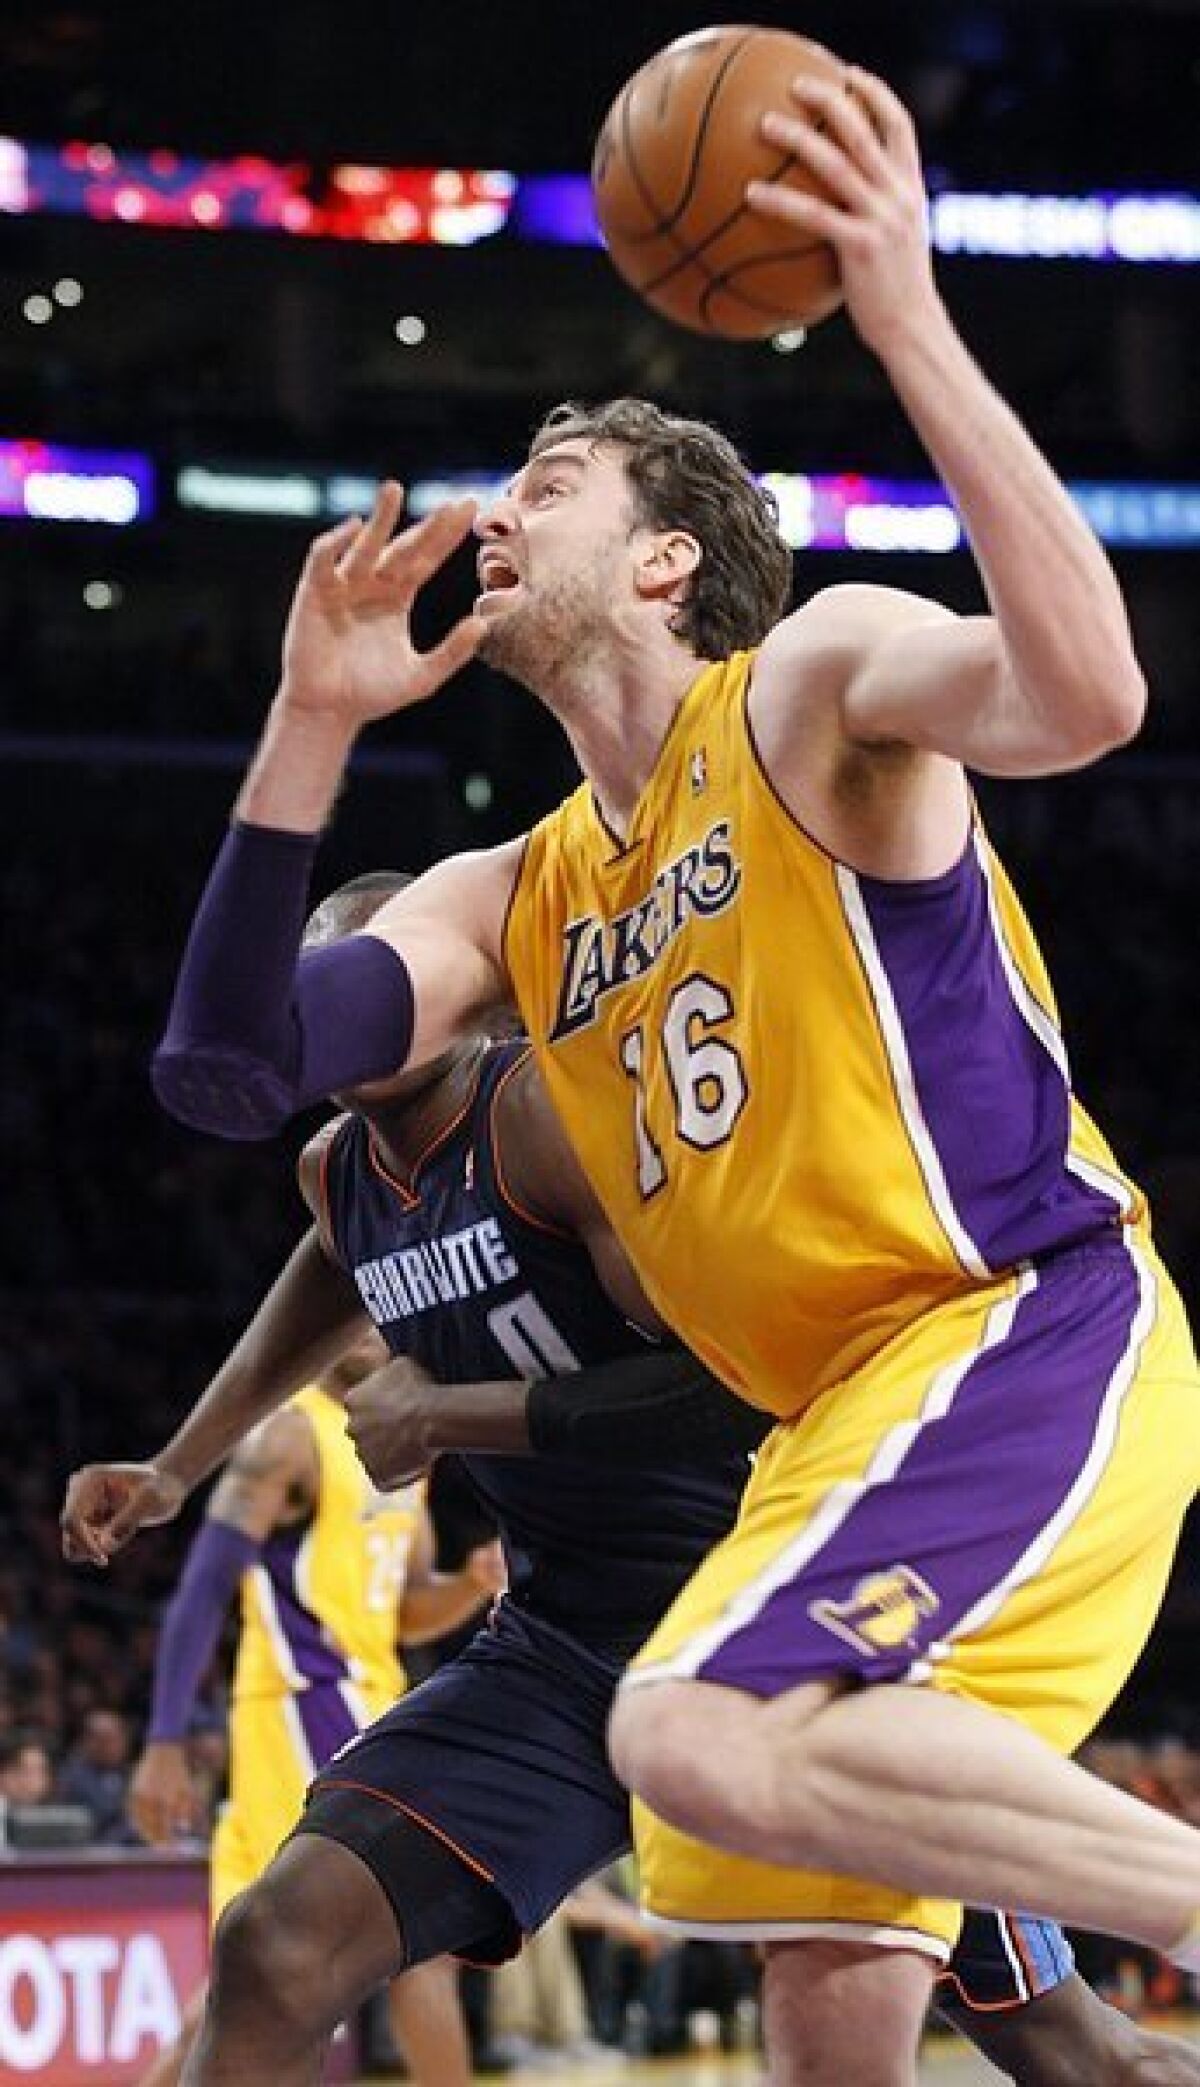 Pau Gasol drives to the basket against the Charlotte Bobcats on Dec. 18.